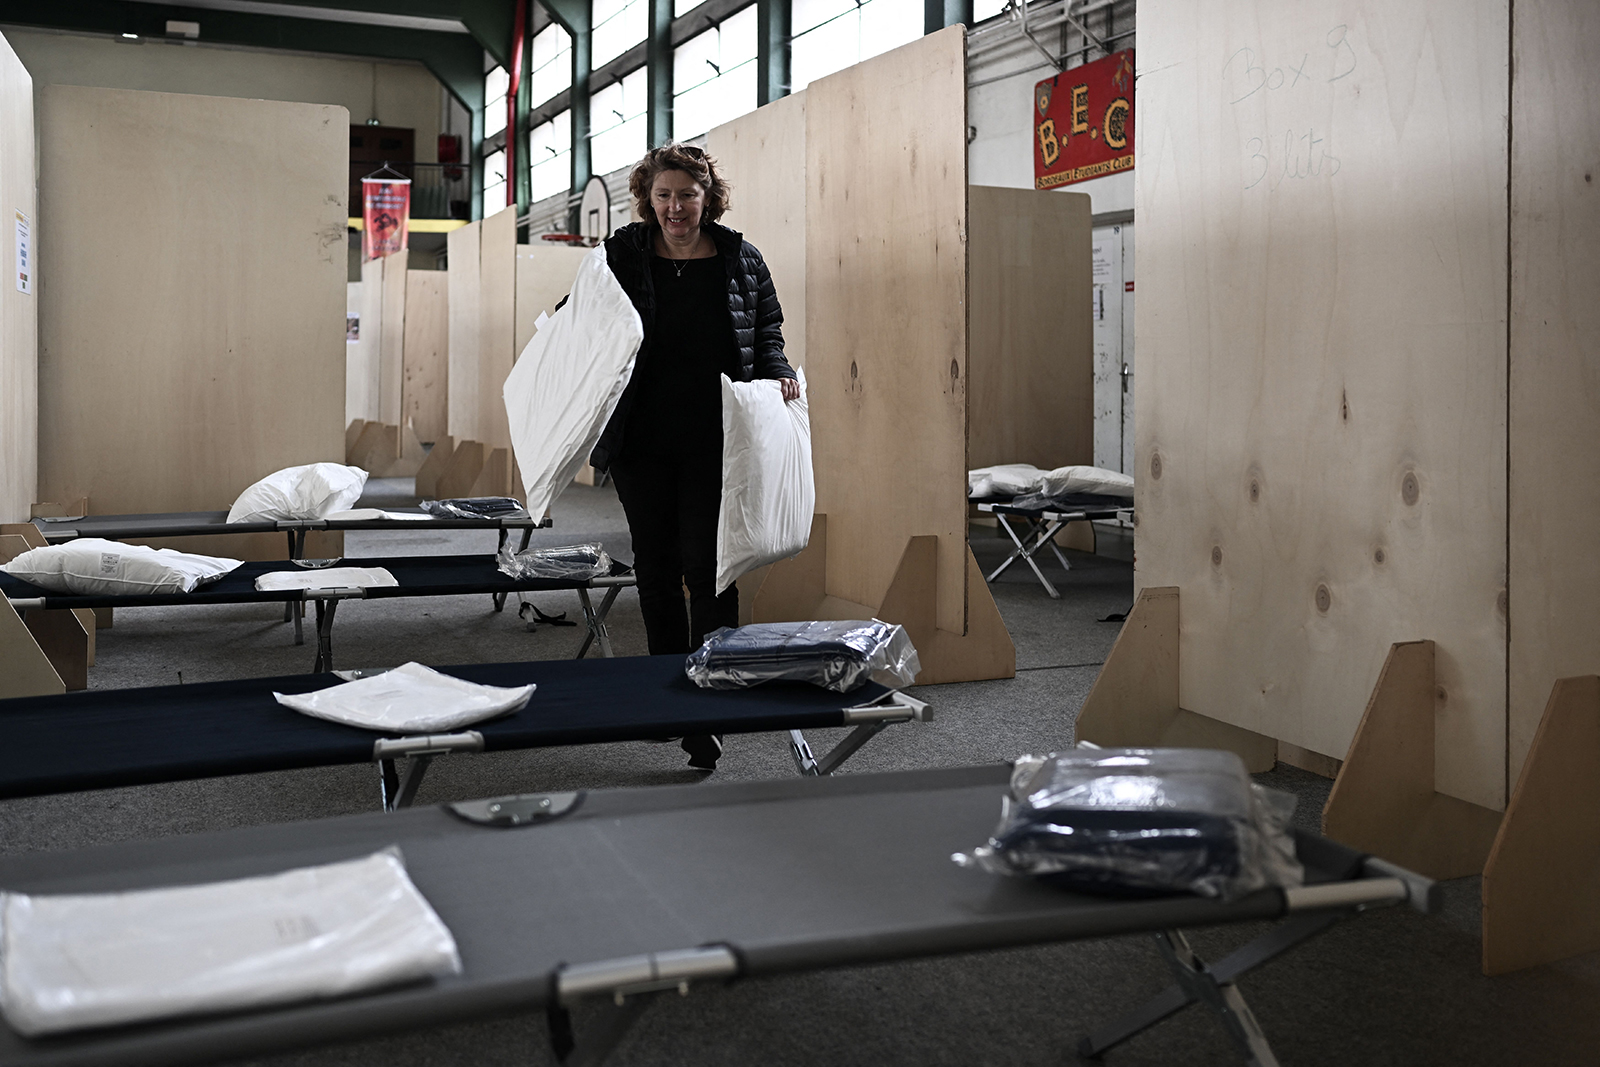 A woman places pillows on beds in a public gymnasium being prepared for Ukrainian refugees in Bordeaux, southwestern France, on March 25.